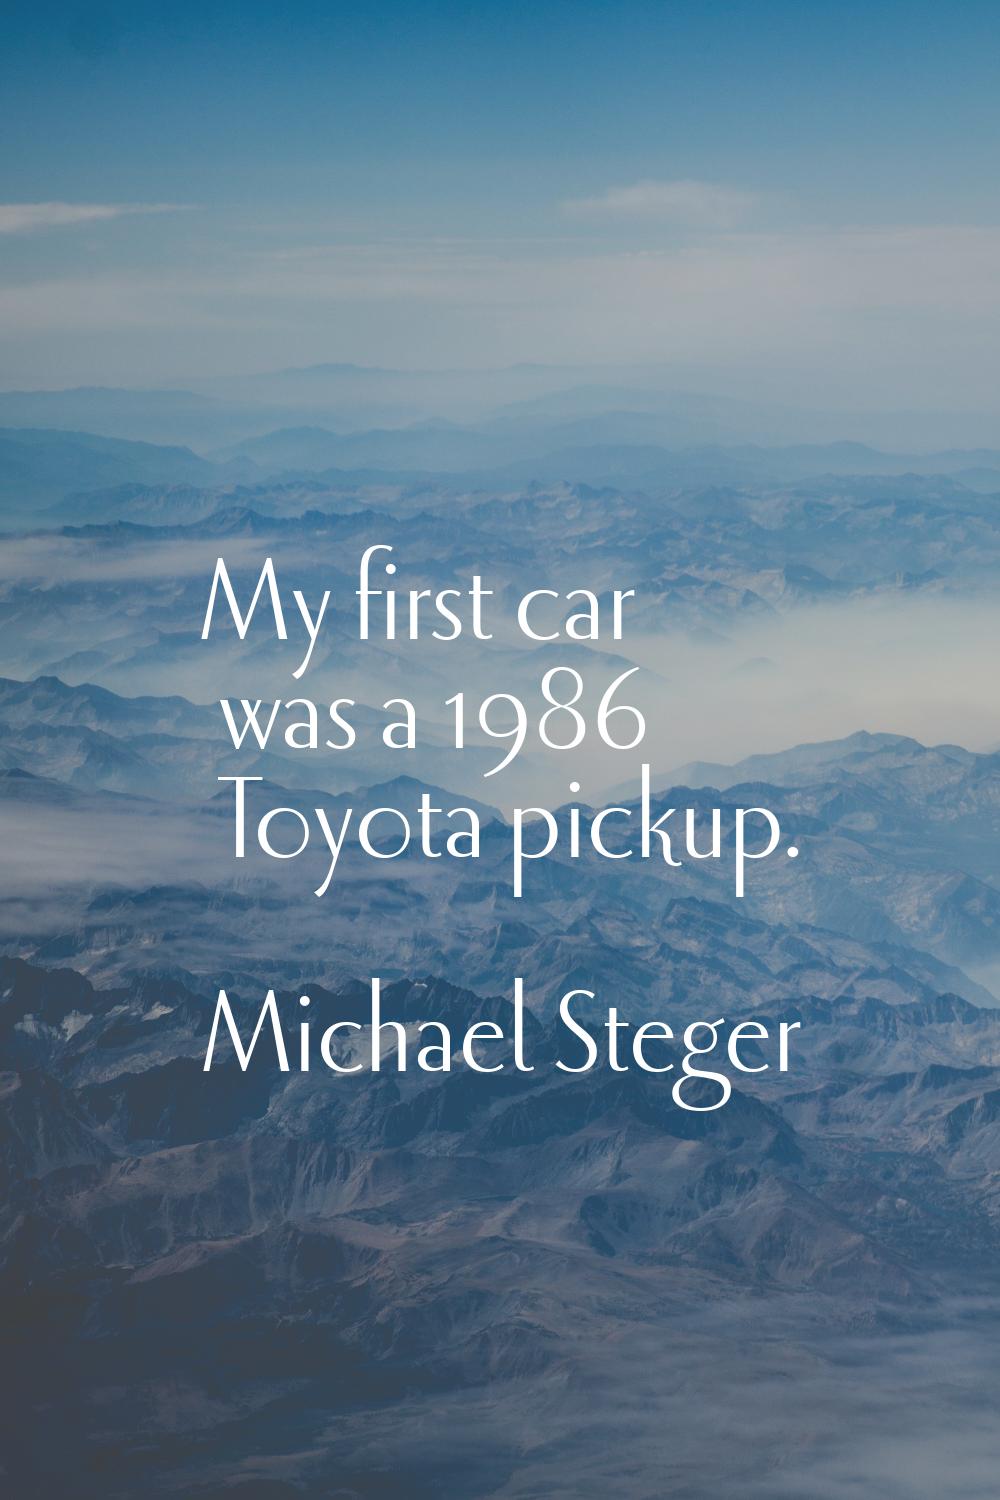 My first car was a 1986 Toyota pickup.